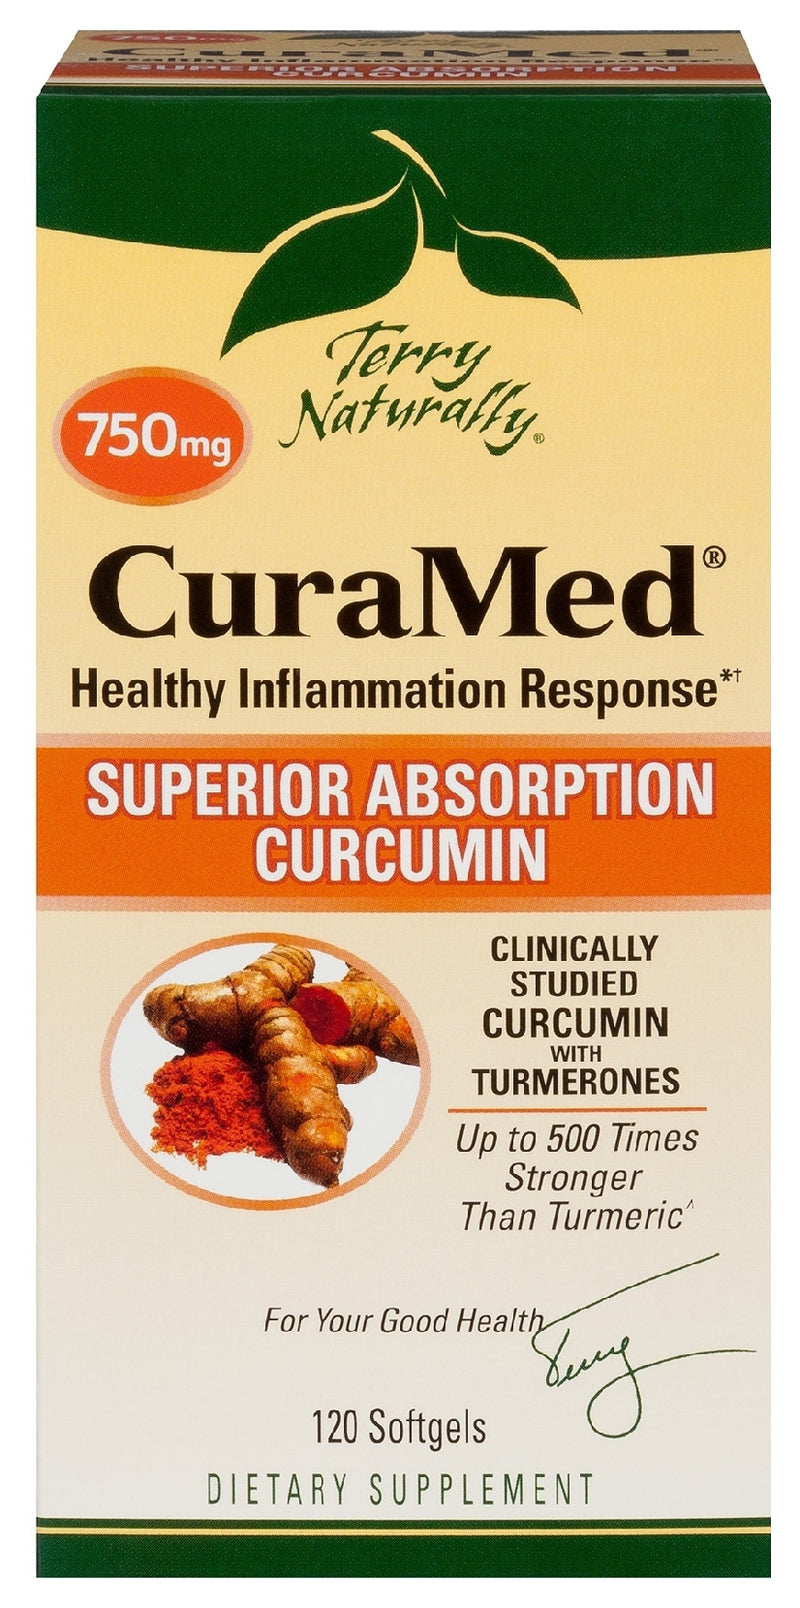 Terry Naturally CuraMed 750 mg 120 Softgels